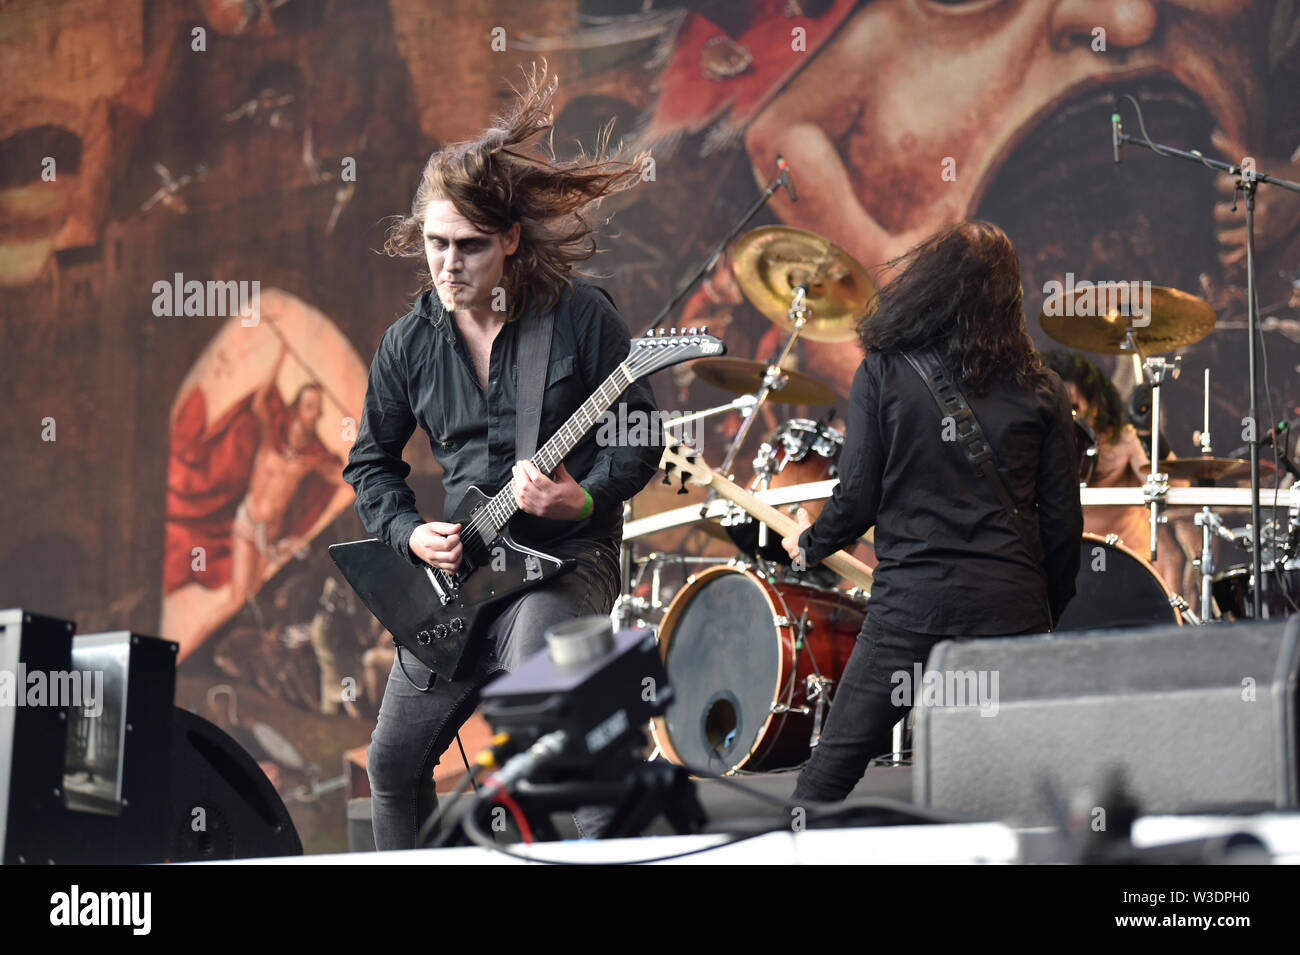 Vizovice, Czech Republic. 13th July, 2019. Guitarist GILDAS LE PAPE performs with Norwegian black metal band Satyricon during the international open-air festival Masters of Rock, in Vizovice, Czech Republic, July 13, 2019. Festival Masters of Rock will take place from Thursday 11th to Sunday 14th July 2019 in the beloved area of the R. Jelinek distillery in Vizovice. Credit: Dalibor Gluck/CTK Photo/Alamy Live News Stock Photo